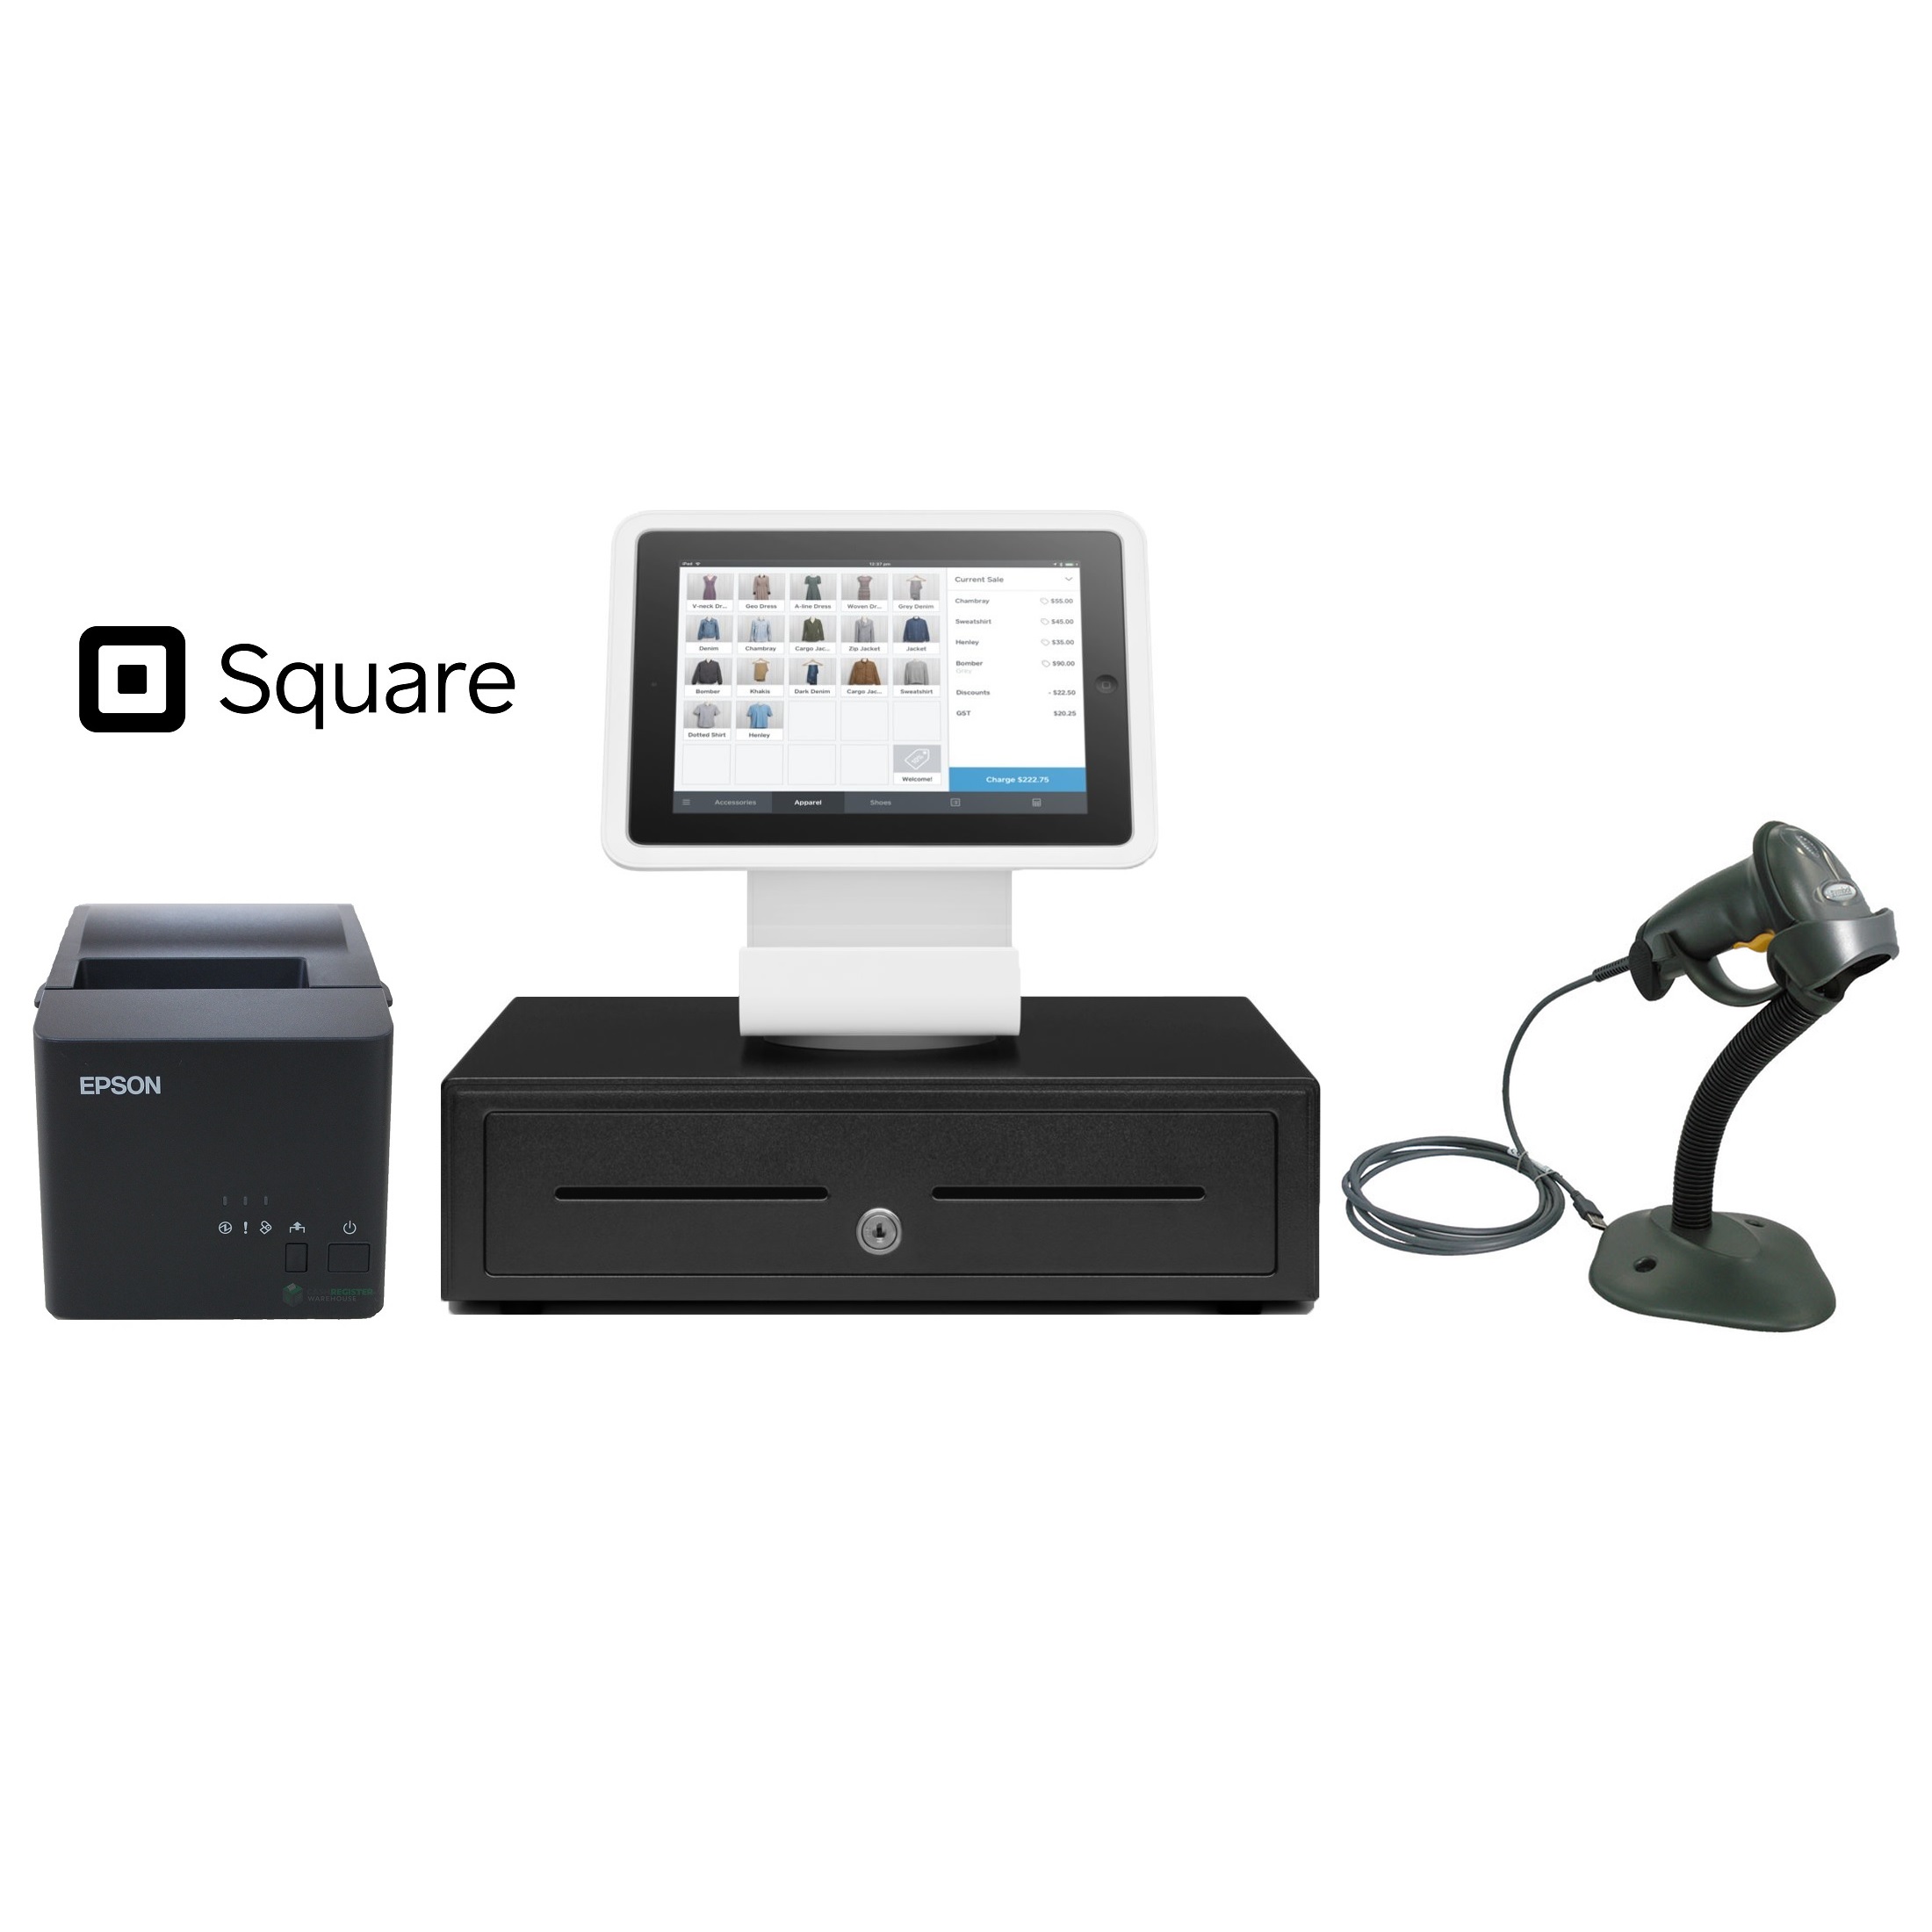 View Square Stand POS Hardware Bundle #8